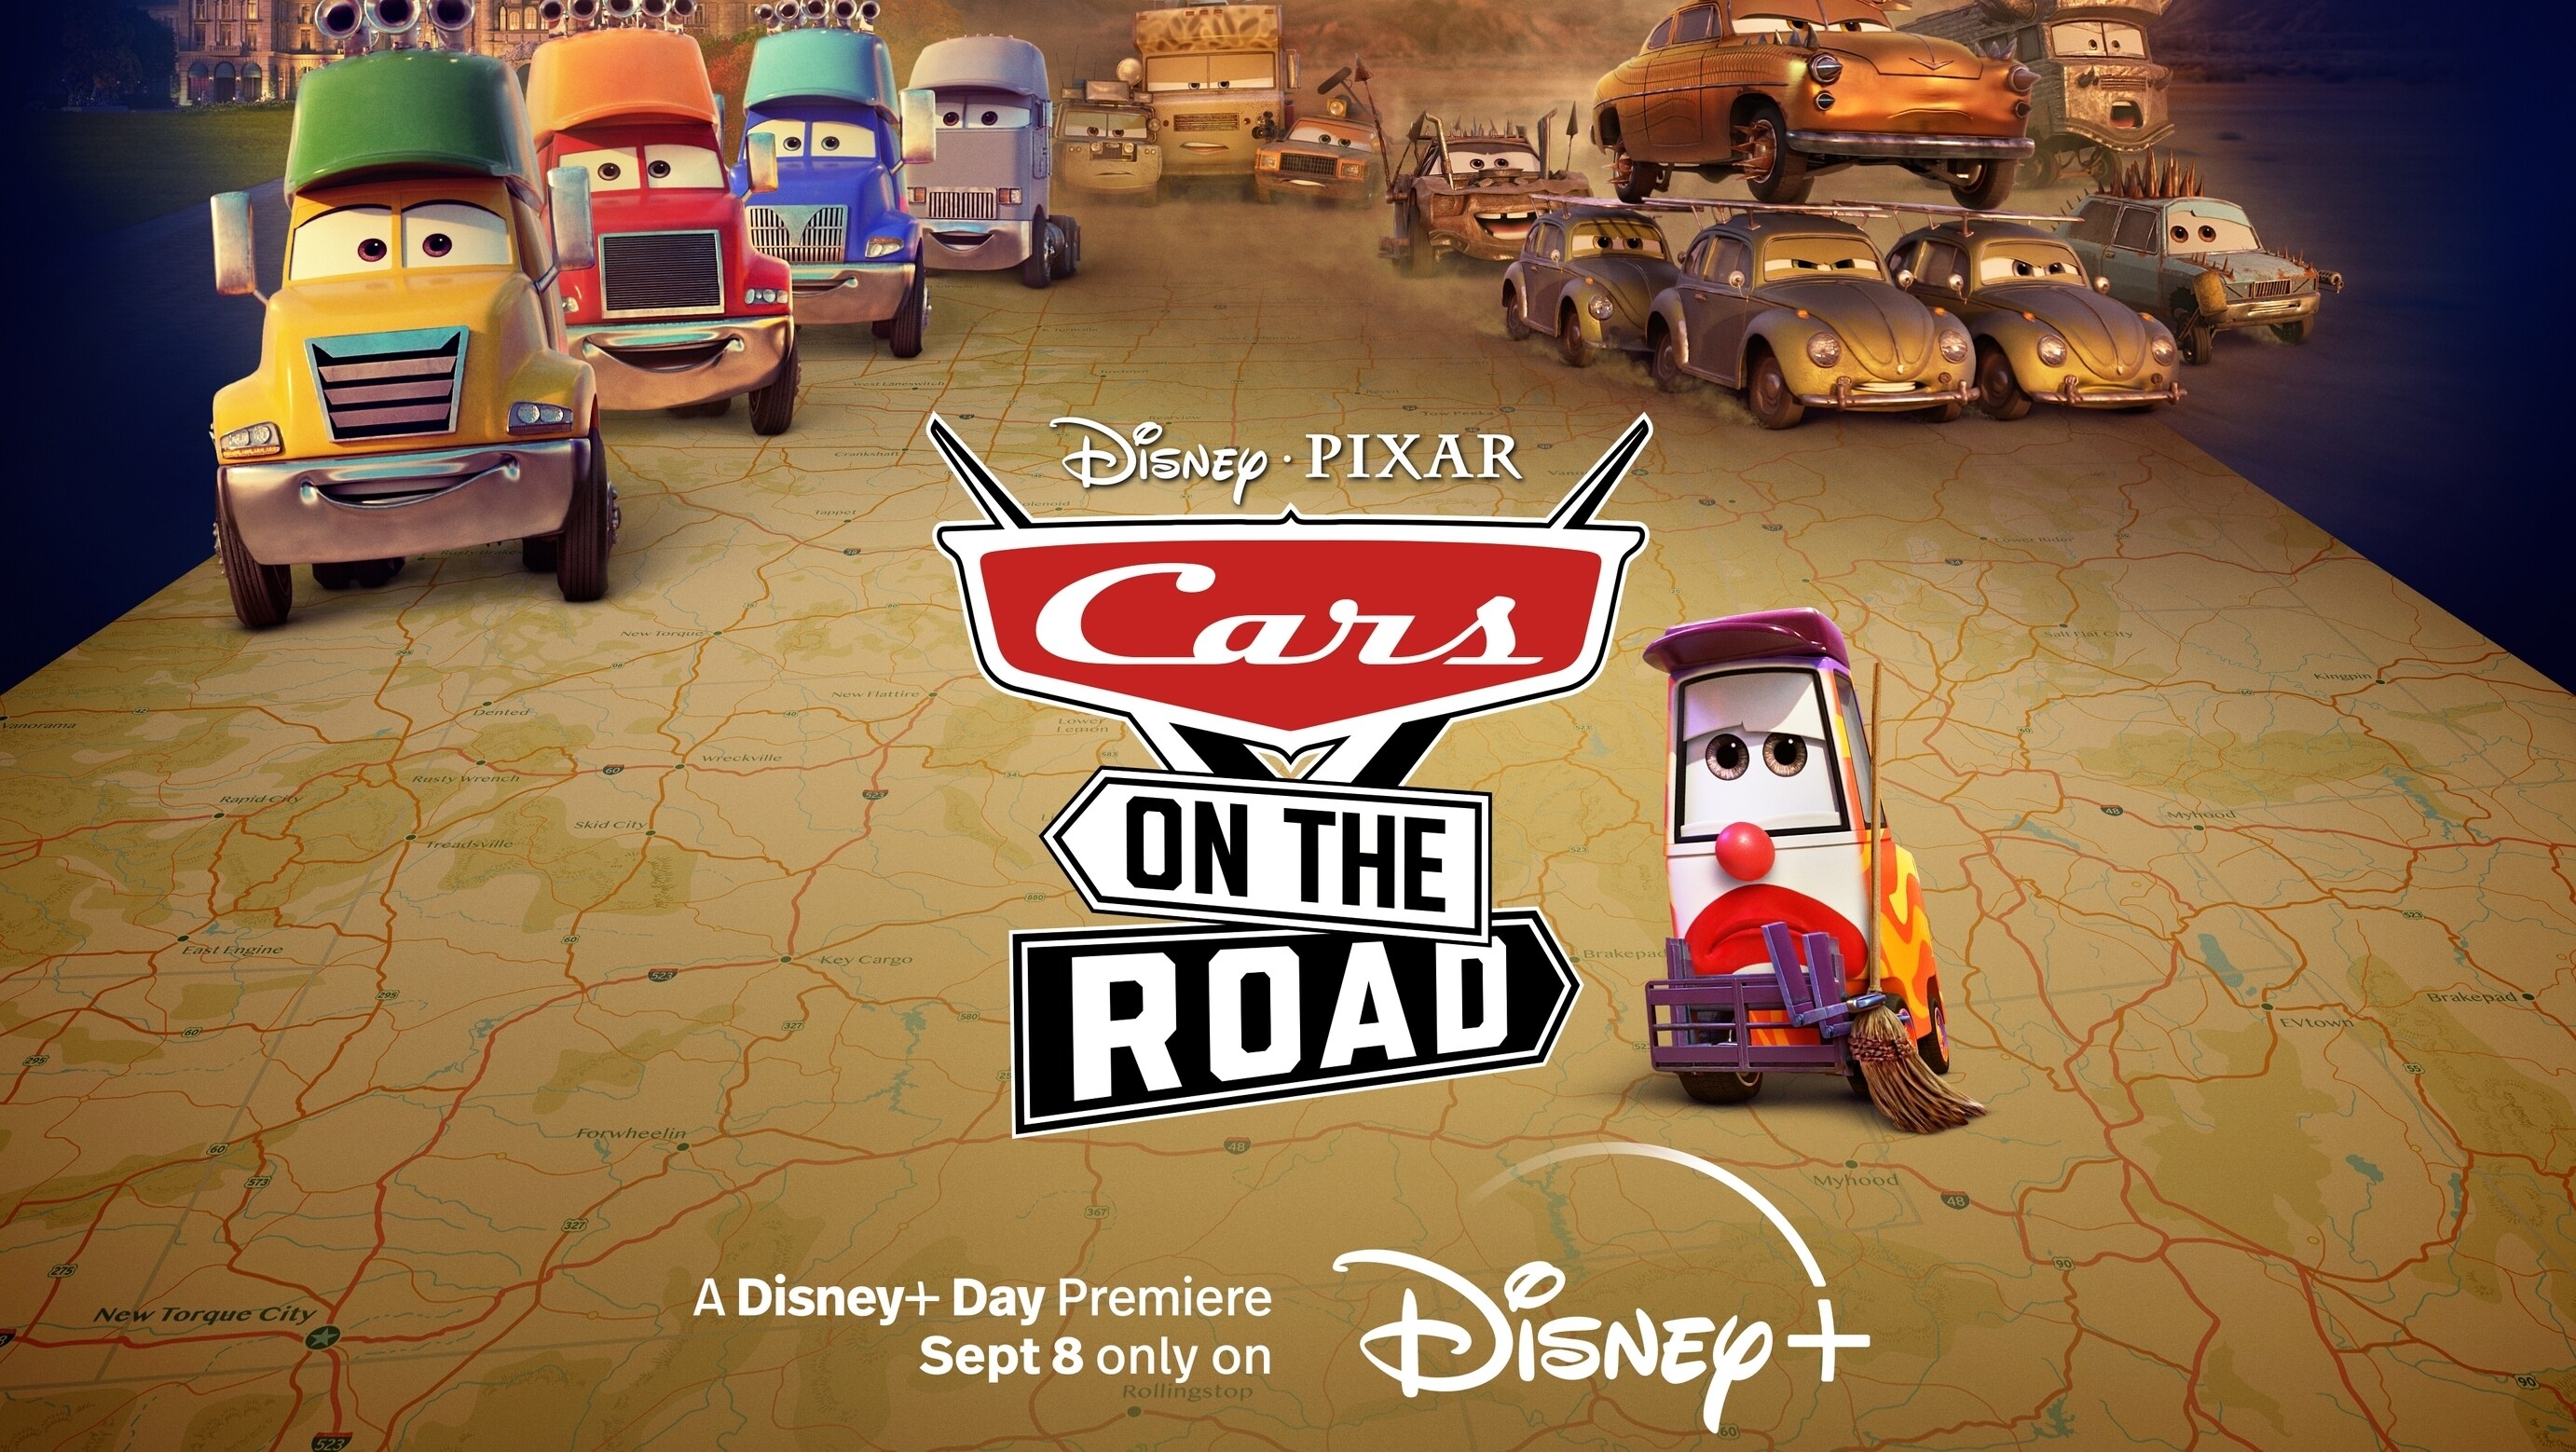 DISNEY AND PIXAR’S ORIGINAL SERIES "CARS ON THE ROAD" DEBUTS ON DISNEY+ DAY, 8 SEPT, 2022